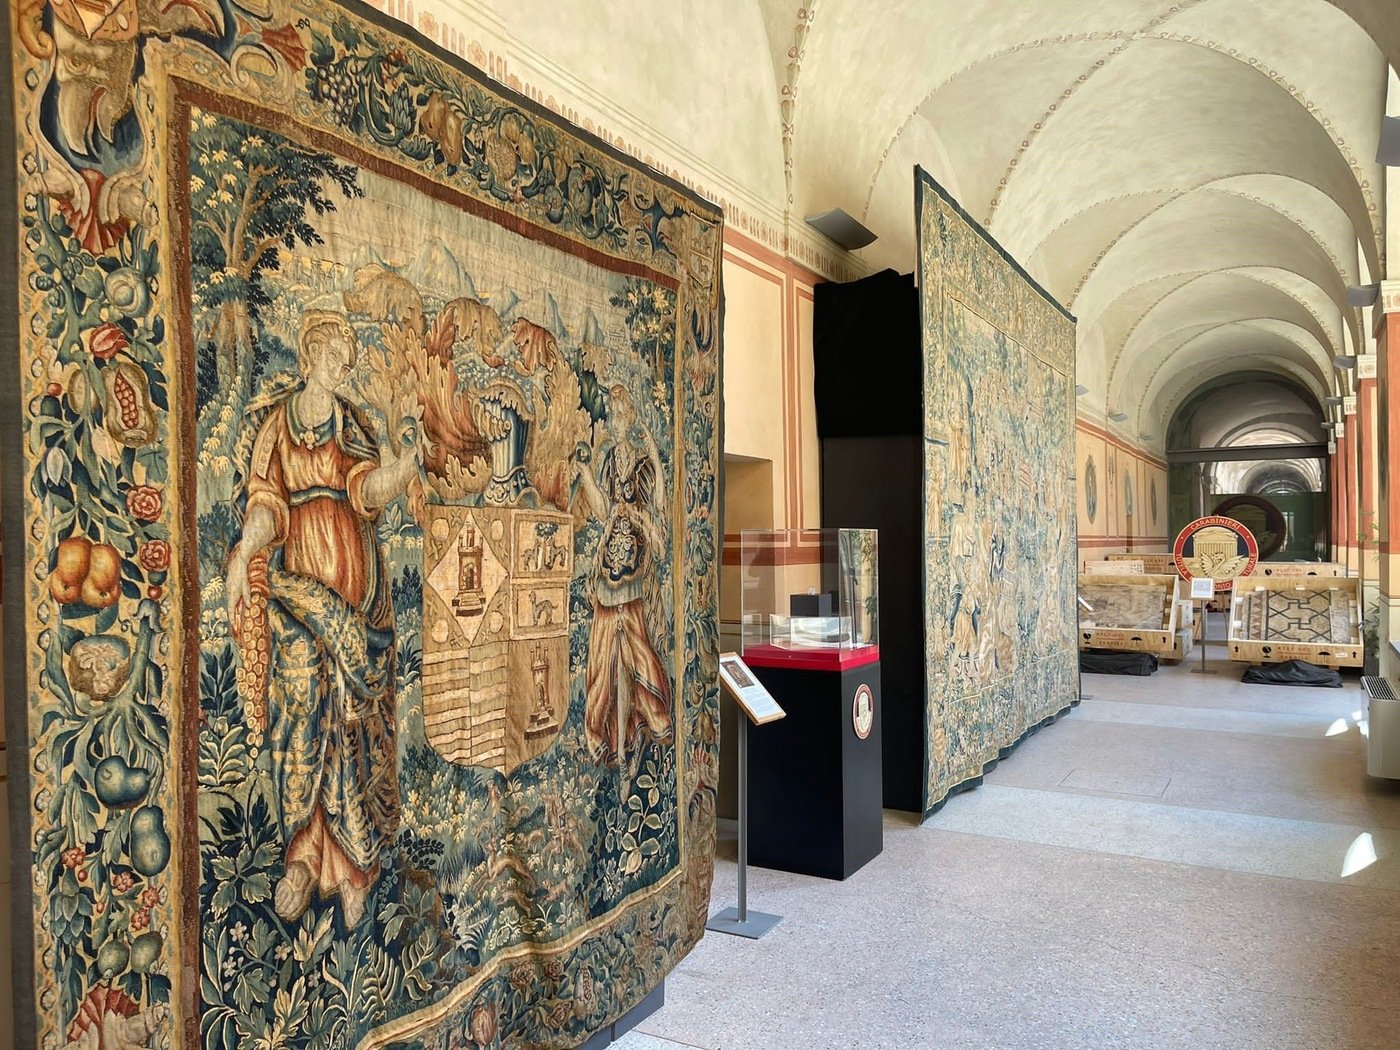 Tapestry Returned to Italy